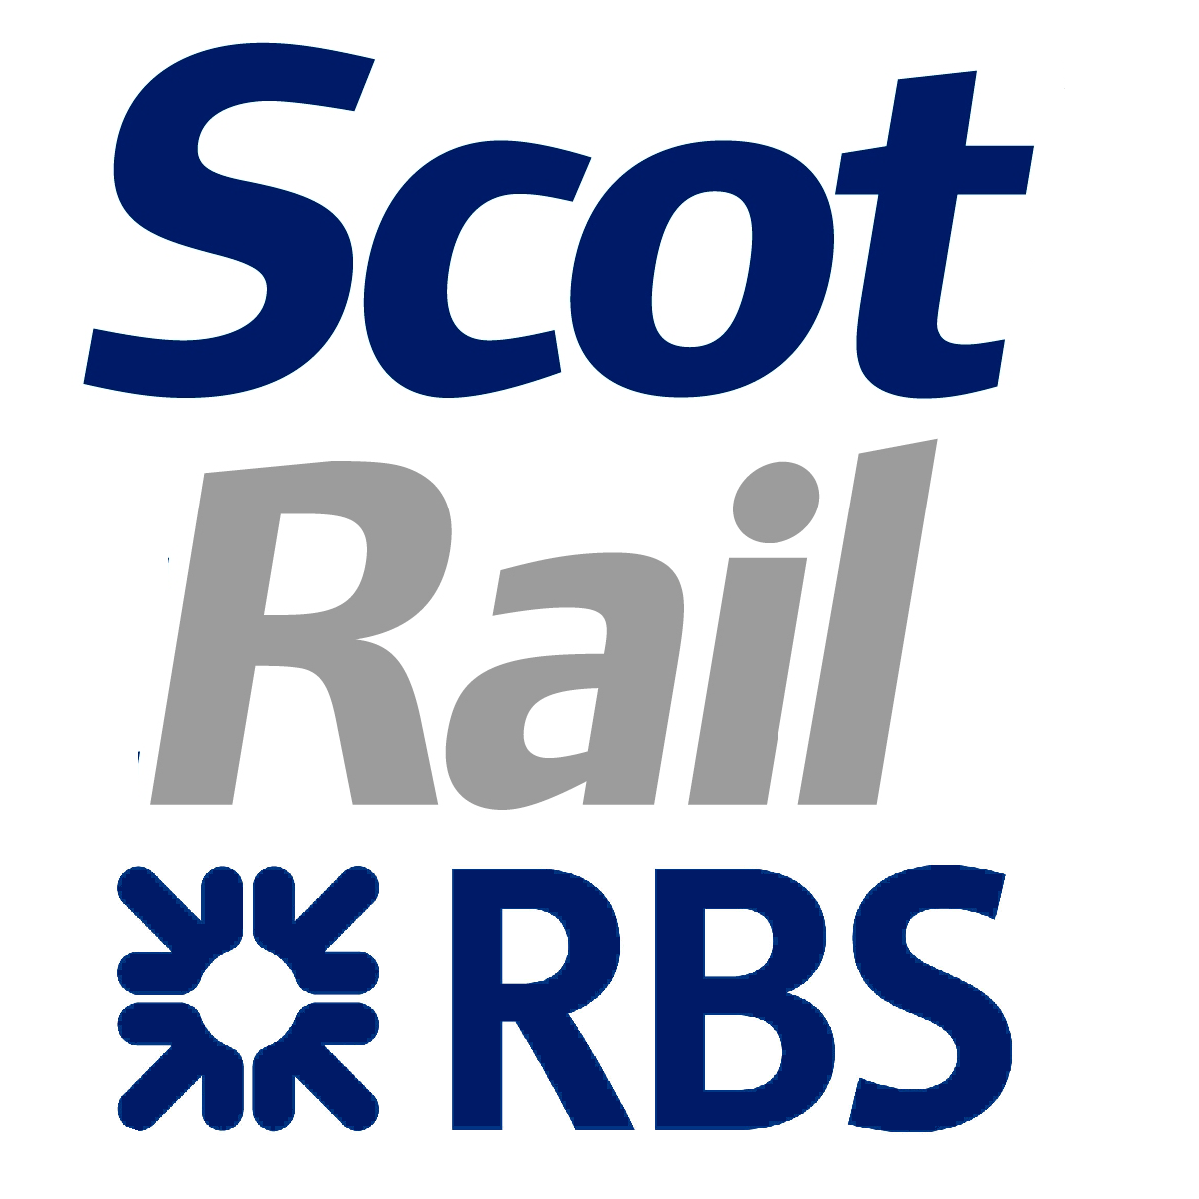 The Official Twitter account of the Continental Man-Game Team, ScotRail-RBS